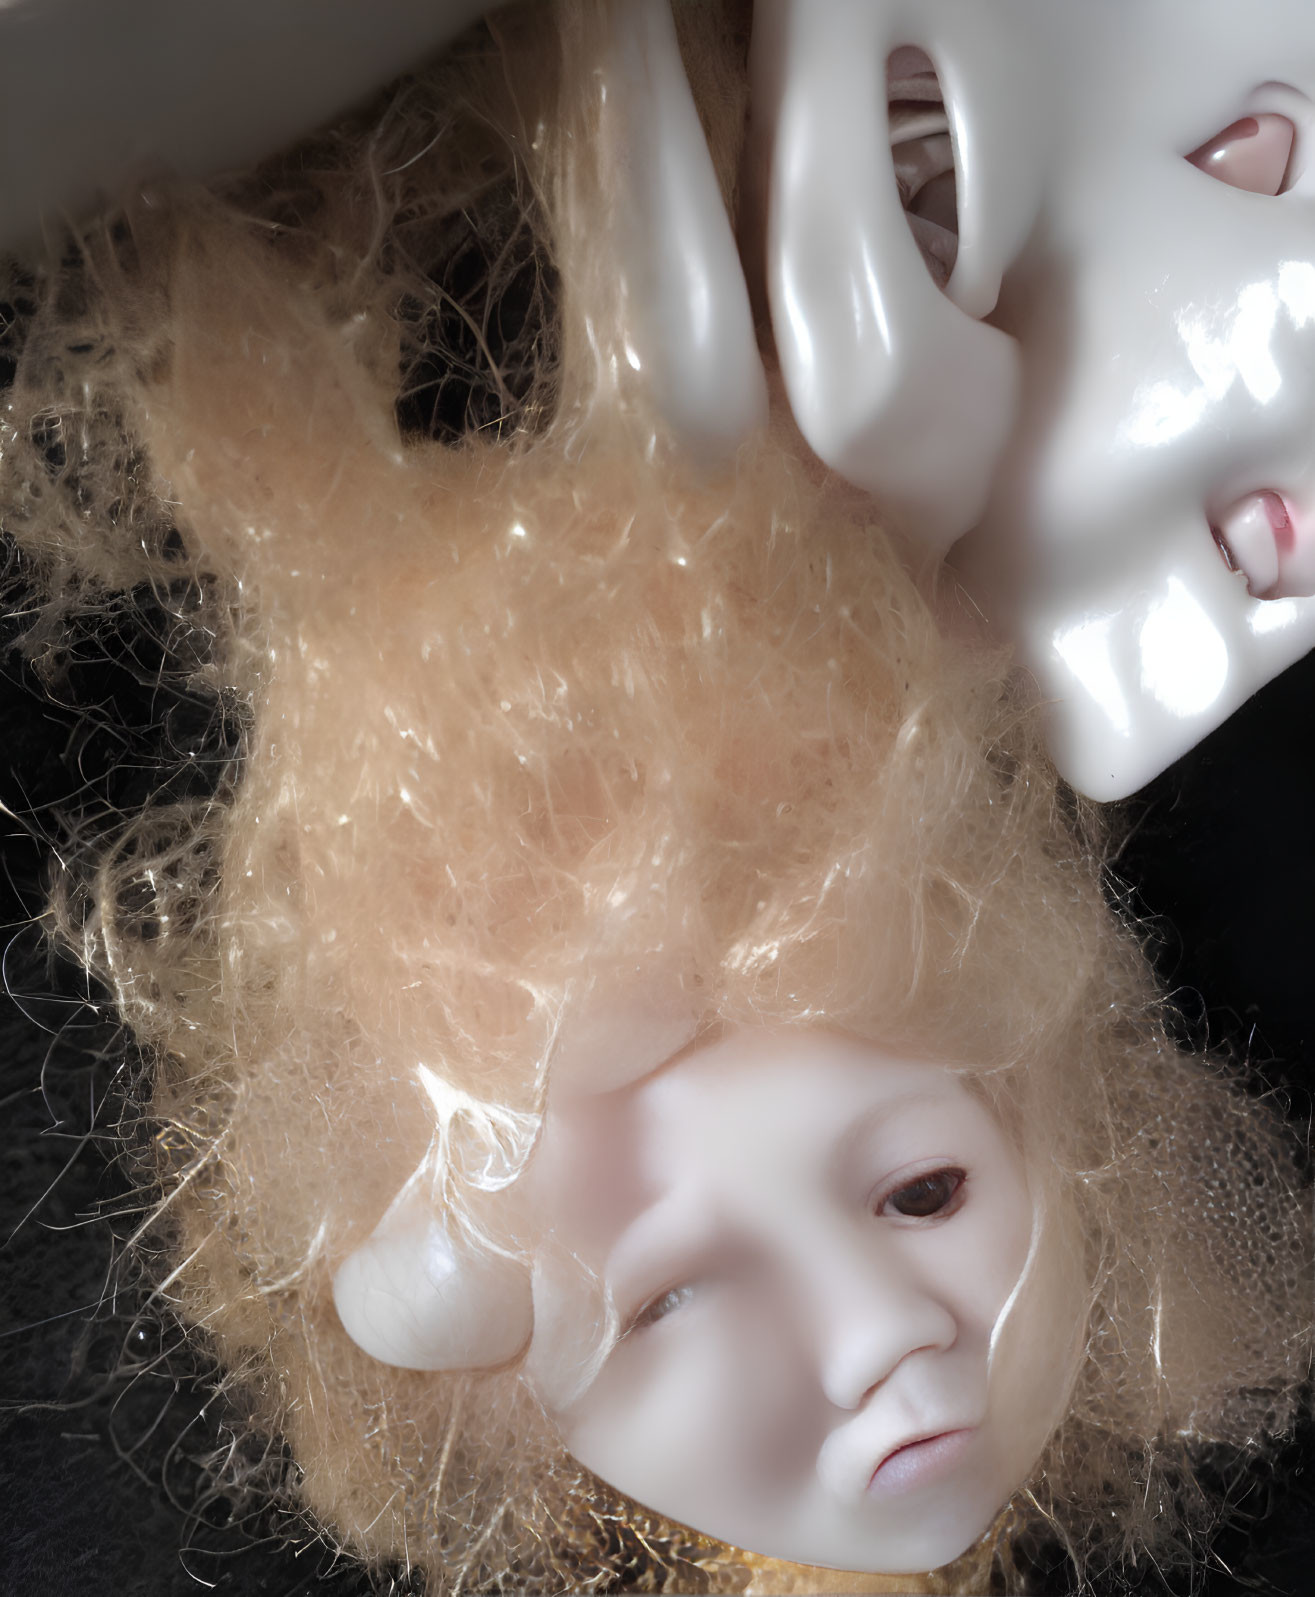 Theatrical masks with comedy and tragedy symbols and blonde, curly hair